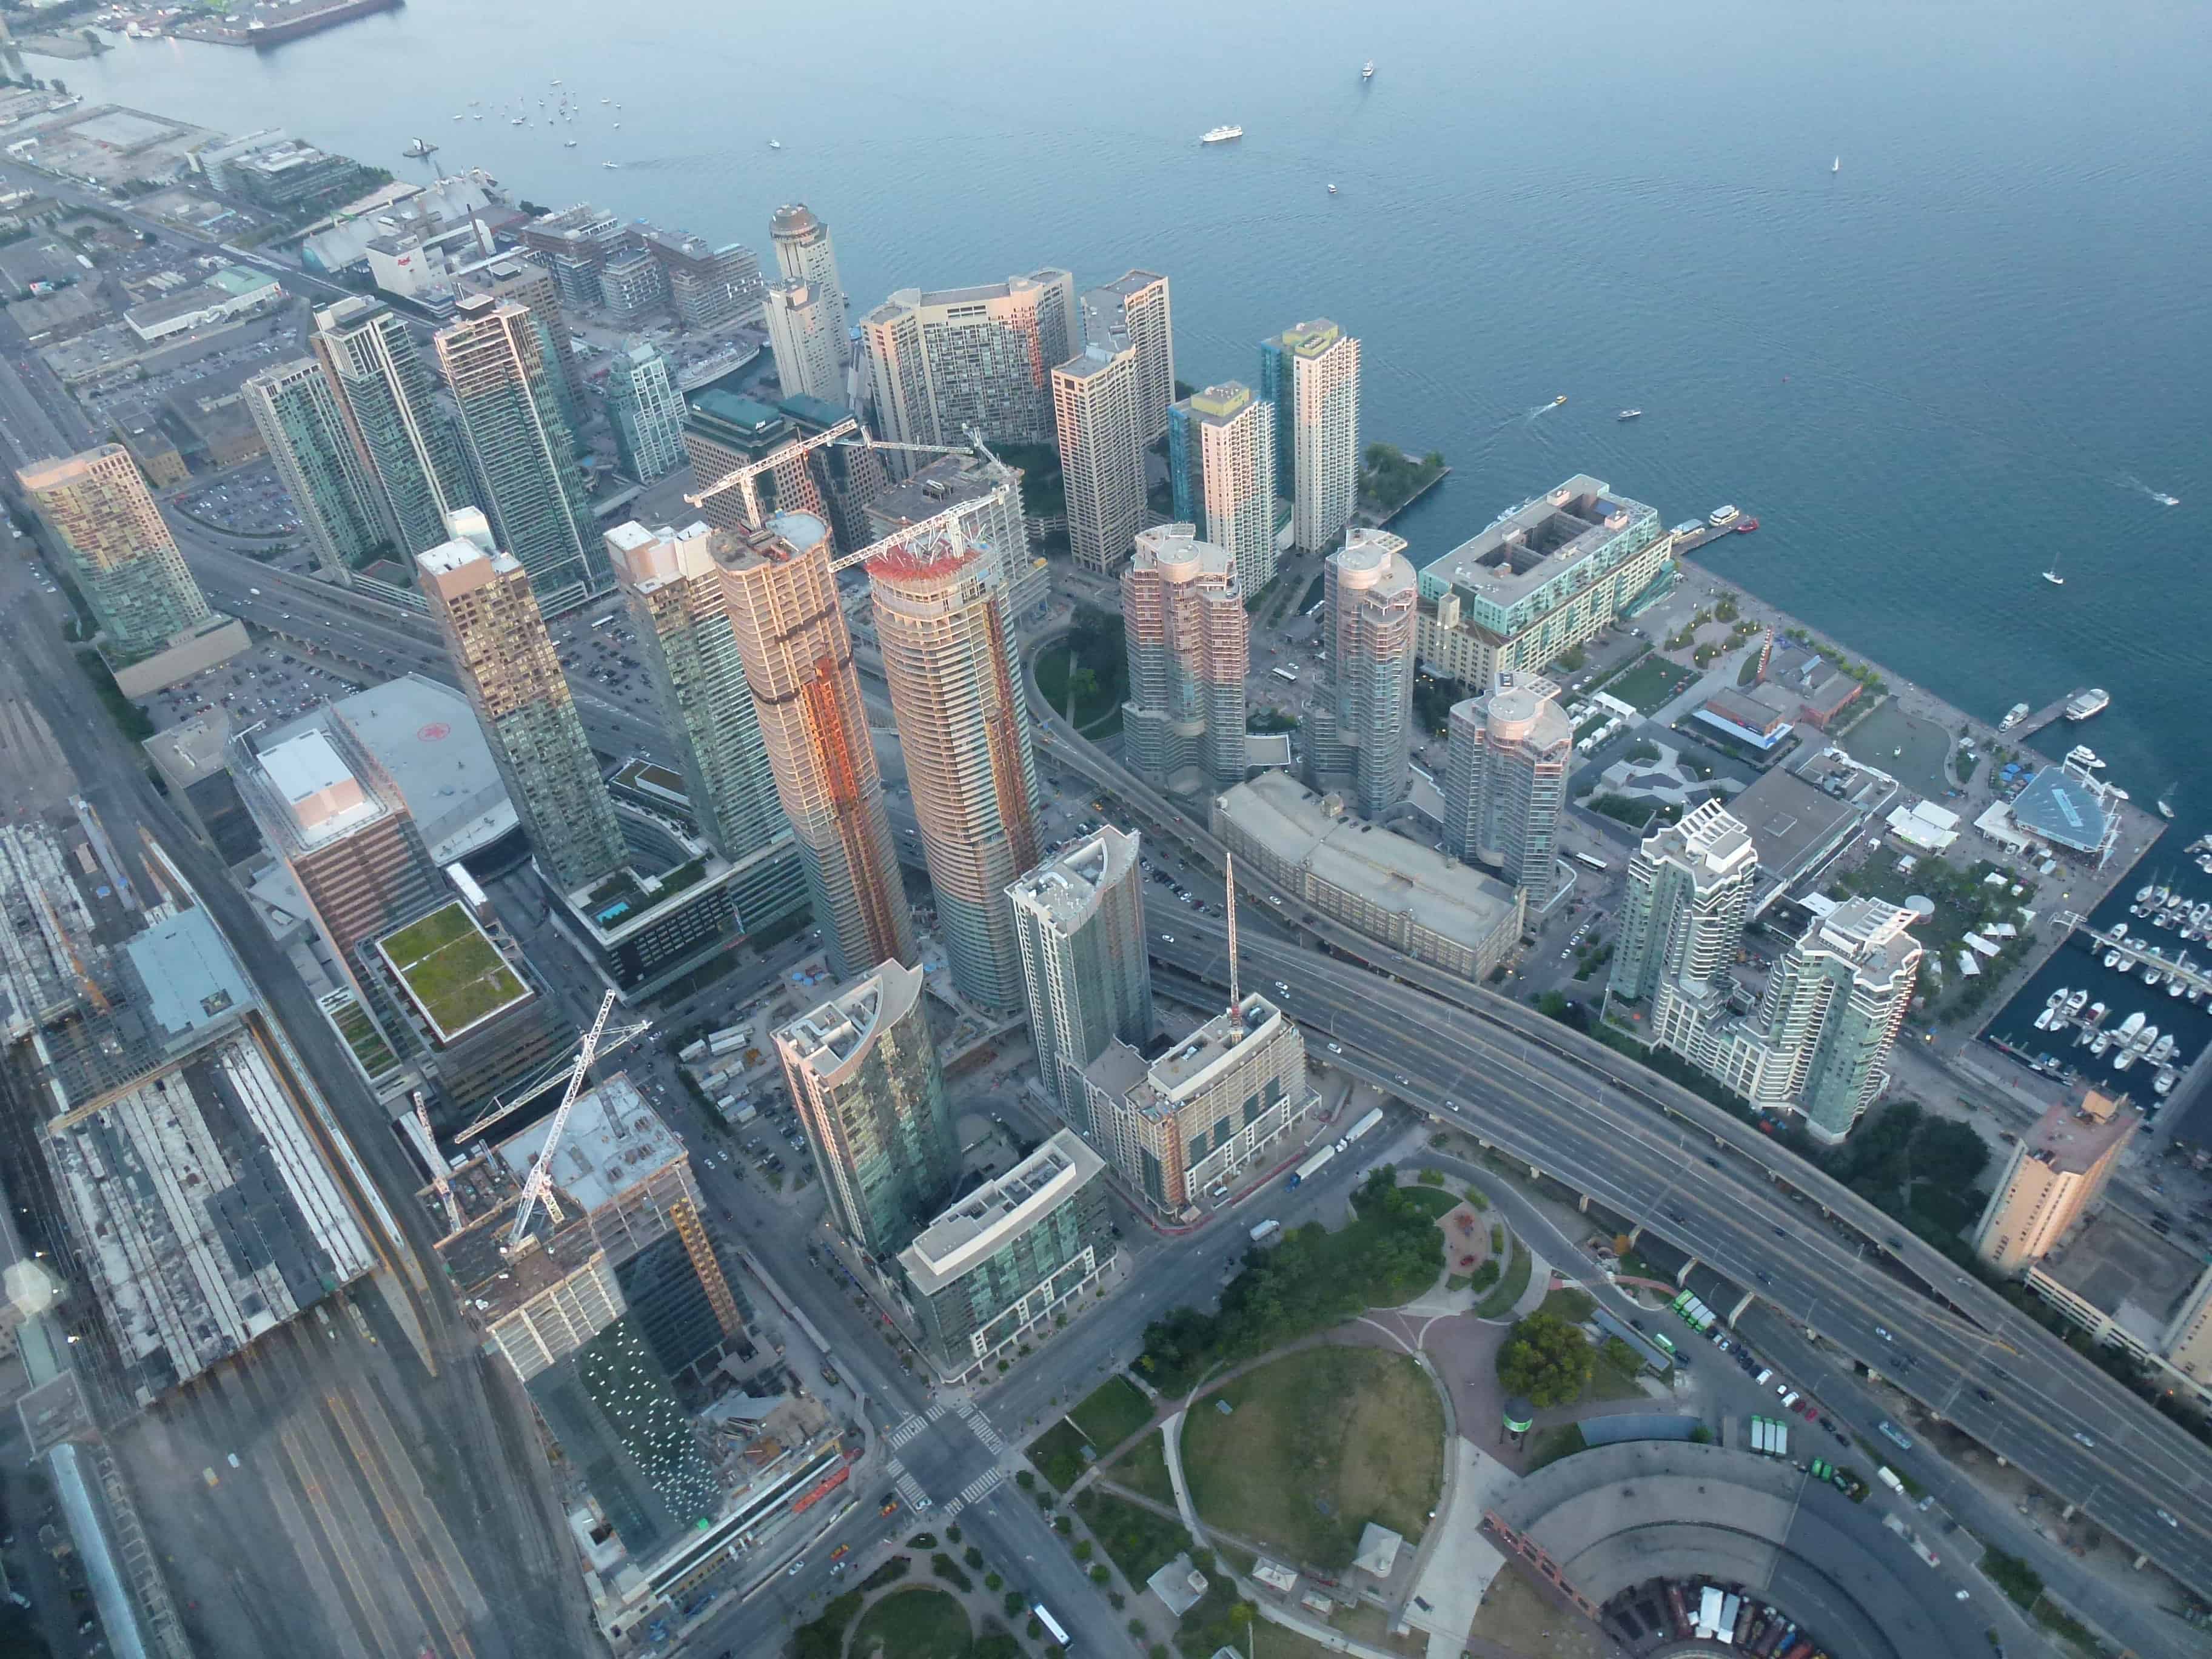 View from the SkyPod at the CN Tower in Toronto, Ontario, Canada